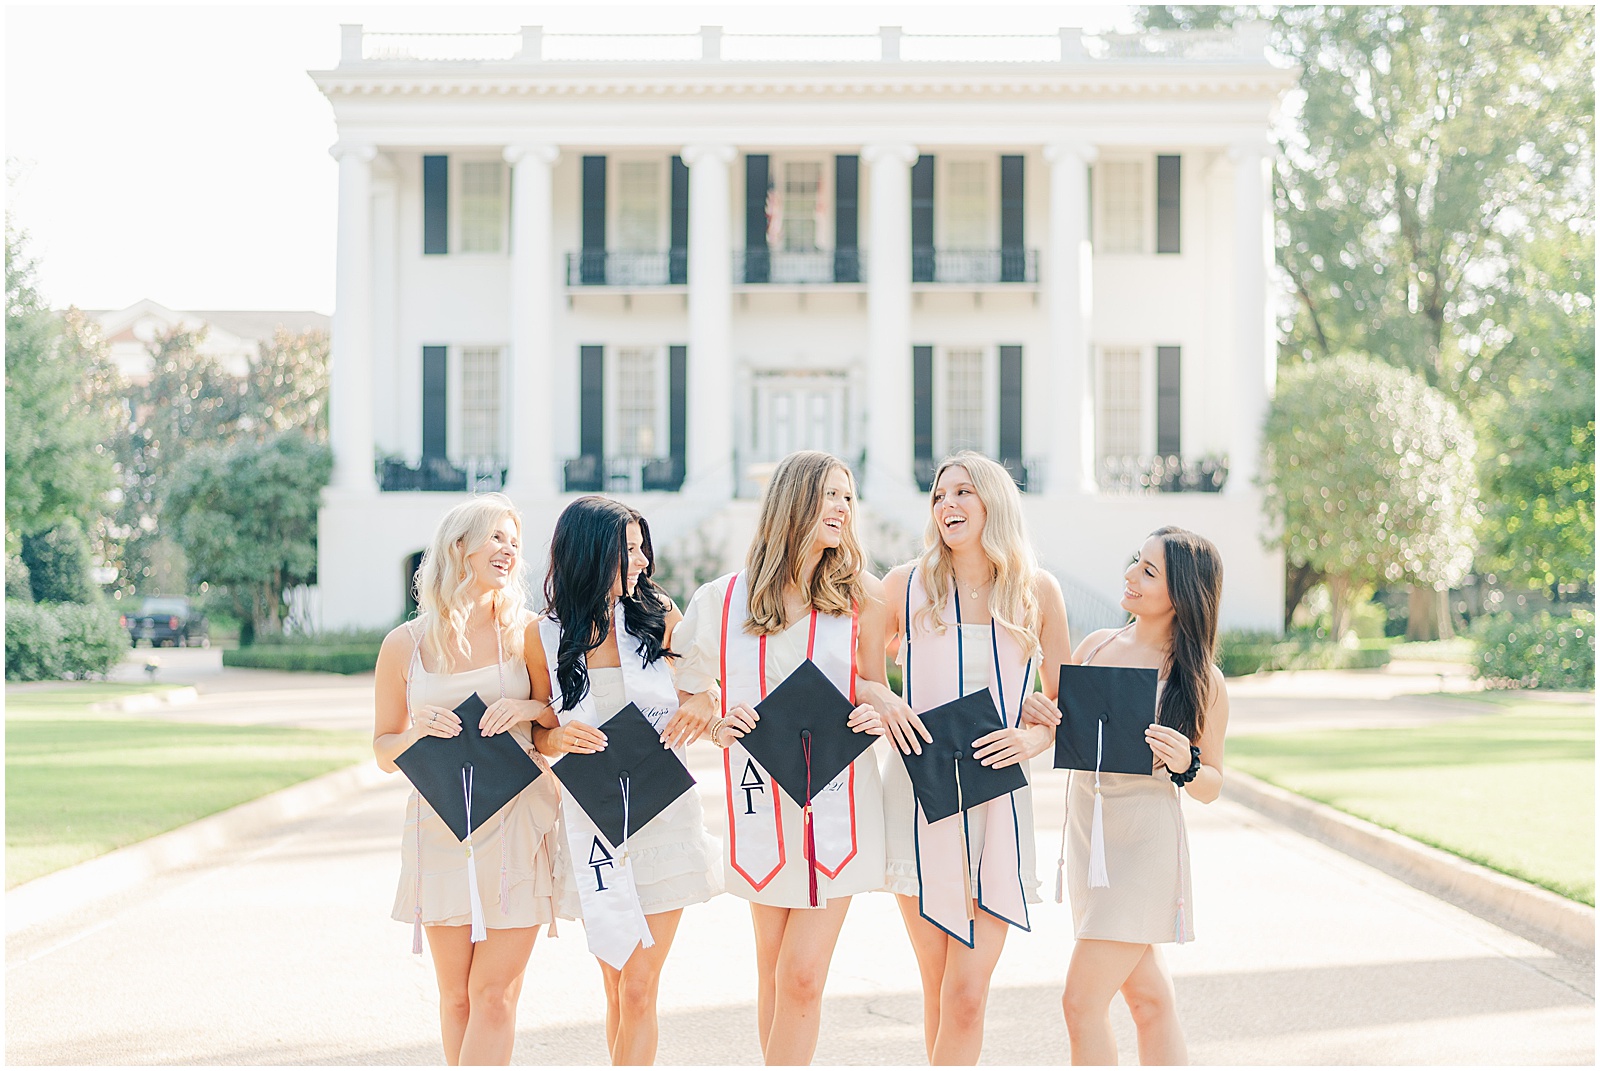 Group Graduation portraits at the President's Mansion at The University of Alabama